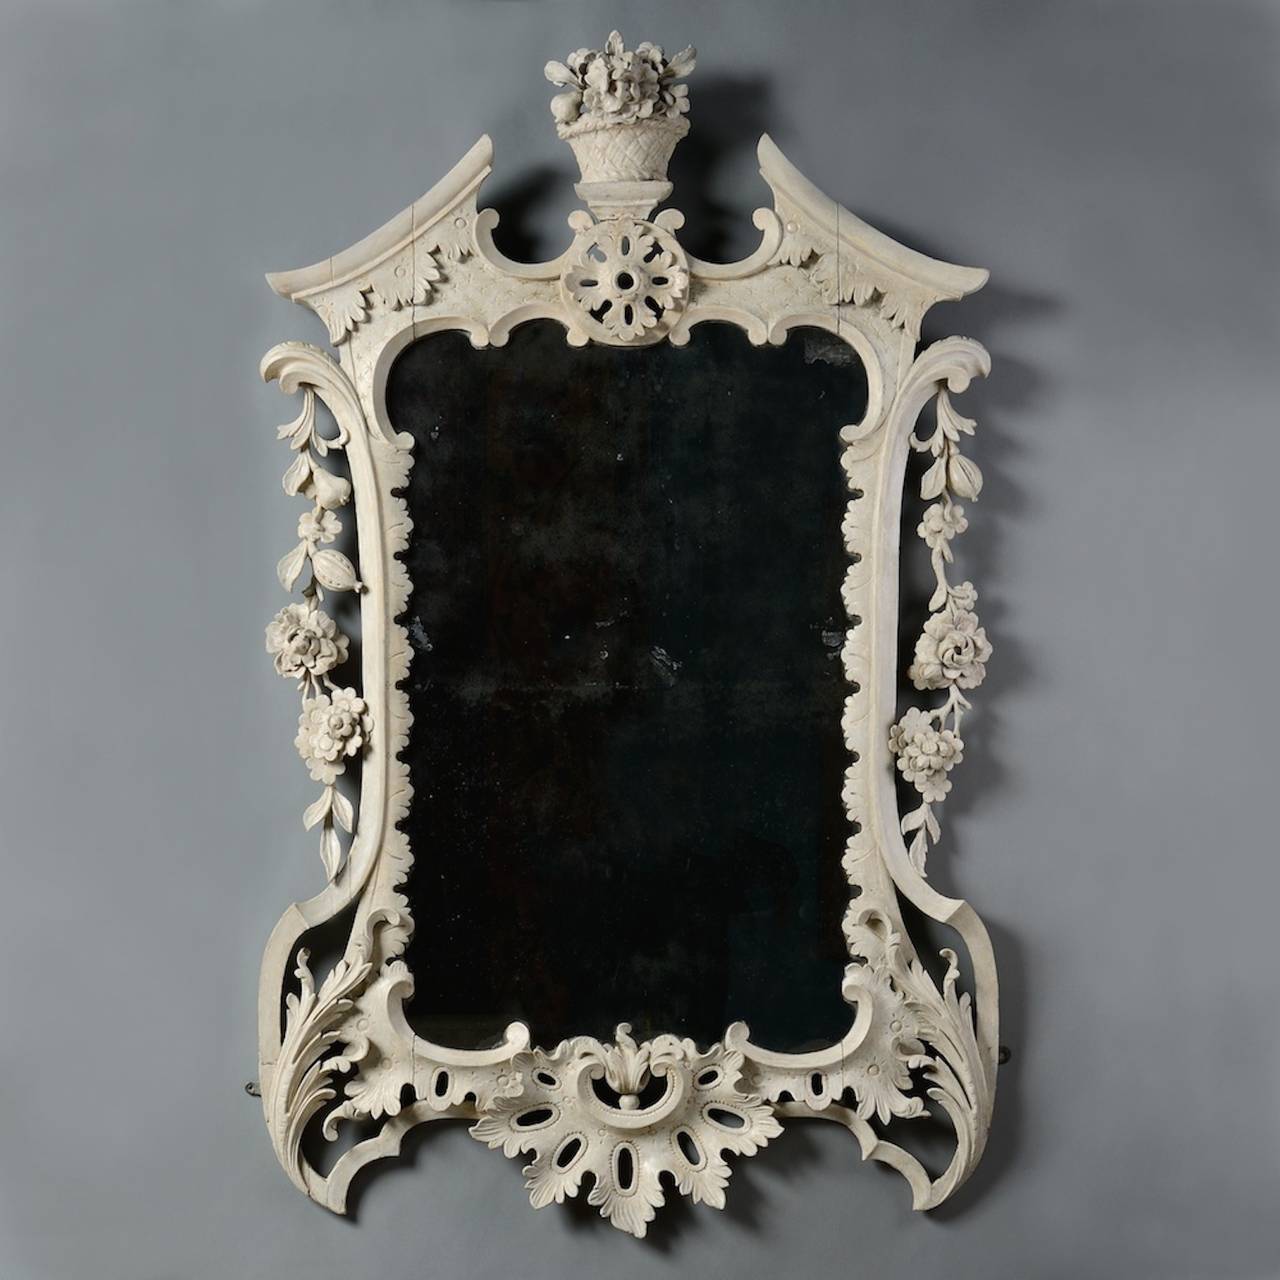 An unusual George II white painted mirror, original plate and decoration, circa 1750.
Carved with scrolls and foliage, the pediment cresting centered by a basket of flowers, the sides hung with festoons of fruit and flowers.